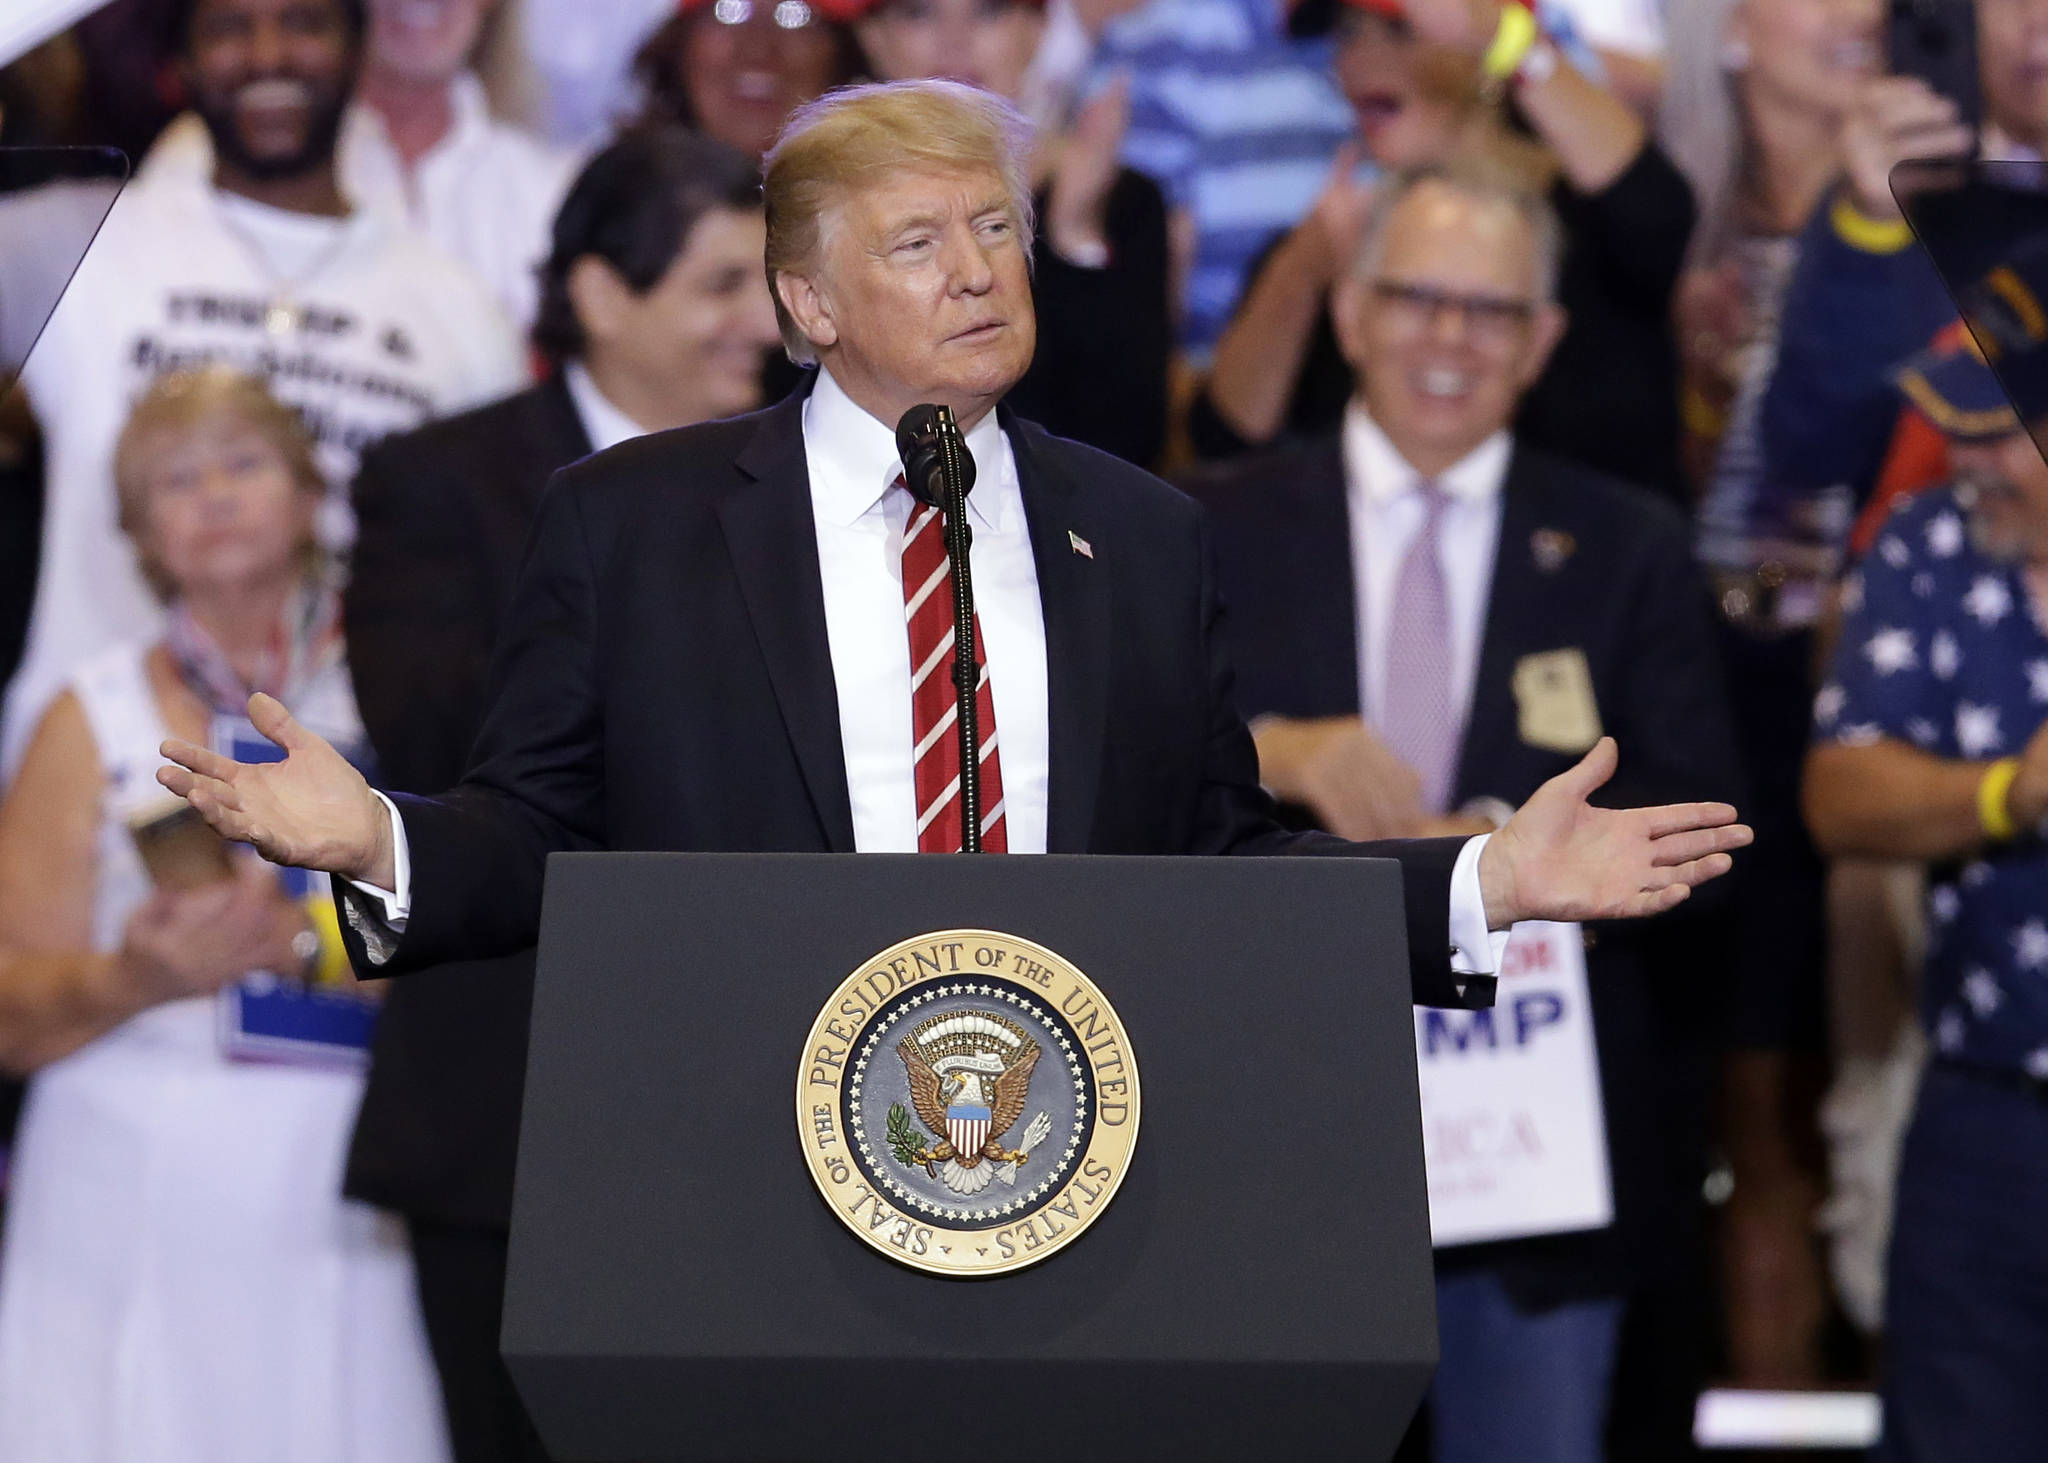 President Donald Trump gestures to the crowd while speaking at a rally at the Phoenix Convention Center Aug. 22 in Phoenix, Arizona. (Rick Scuteri | The Associated Press)